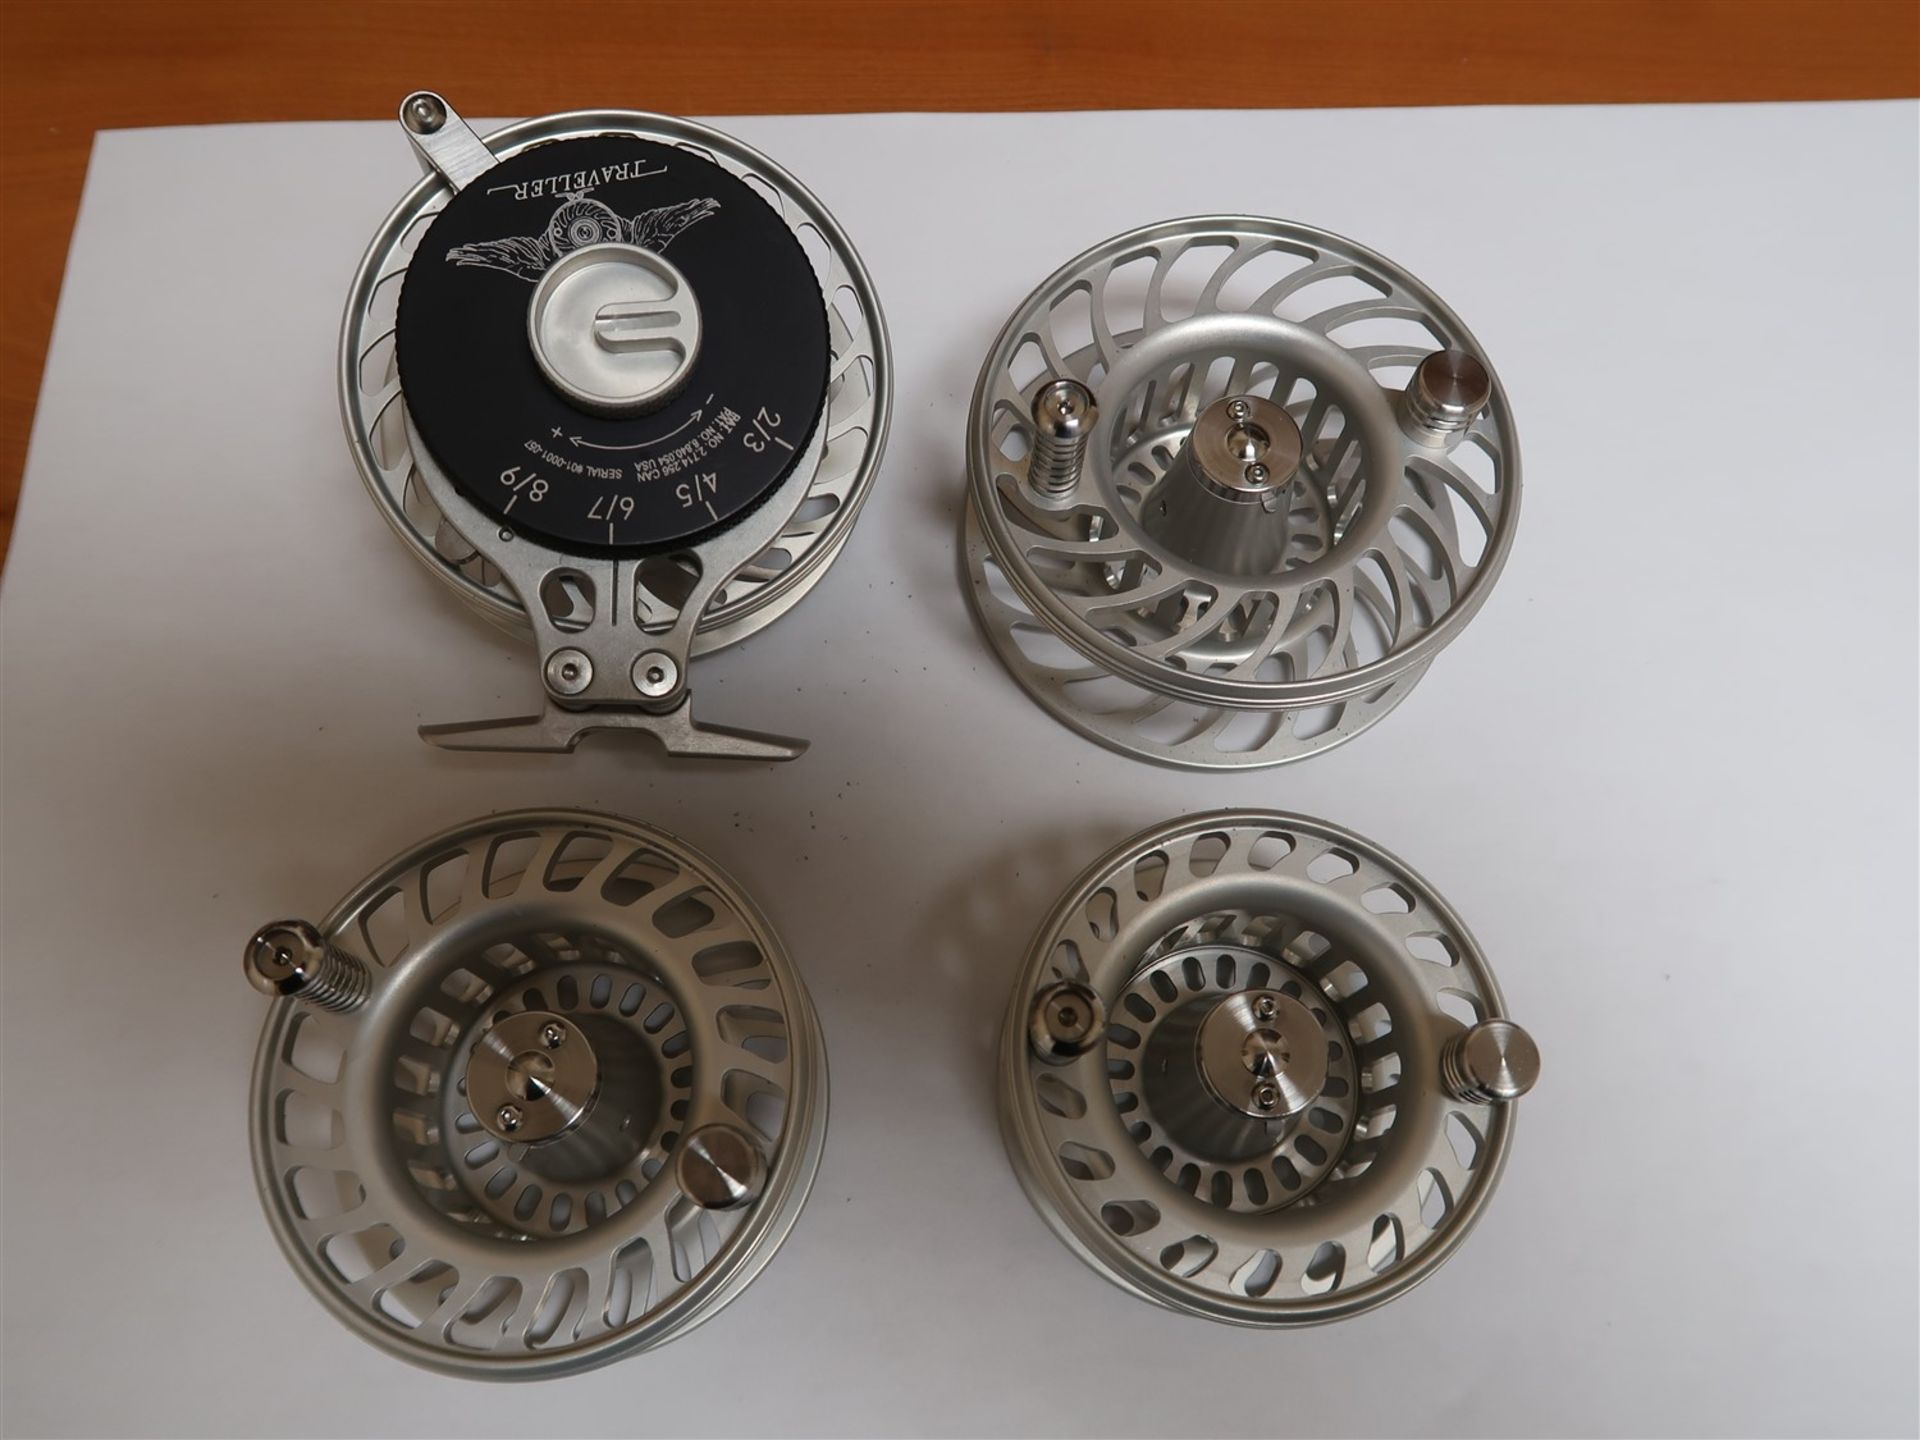 The Traveller Set of 4 interchangeable adjustable spool size Fly Fishing Reels (Silver Satin Finish) - Image 5 of 5